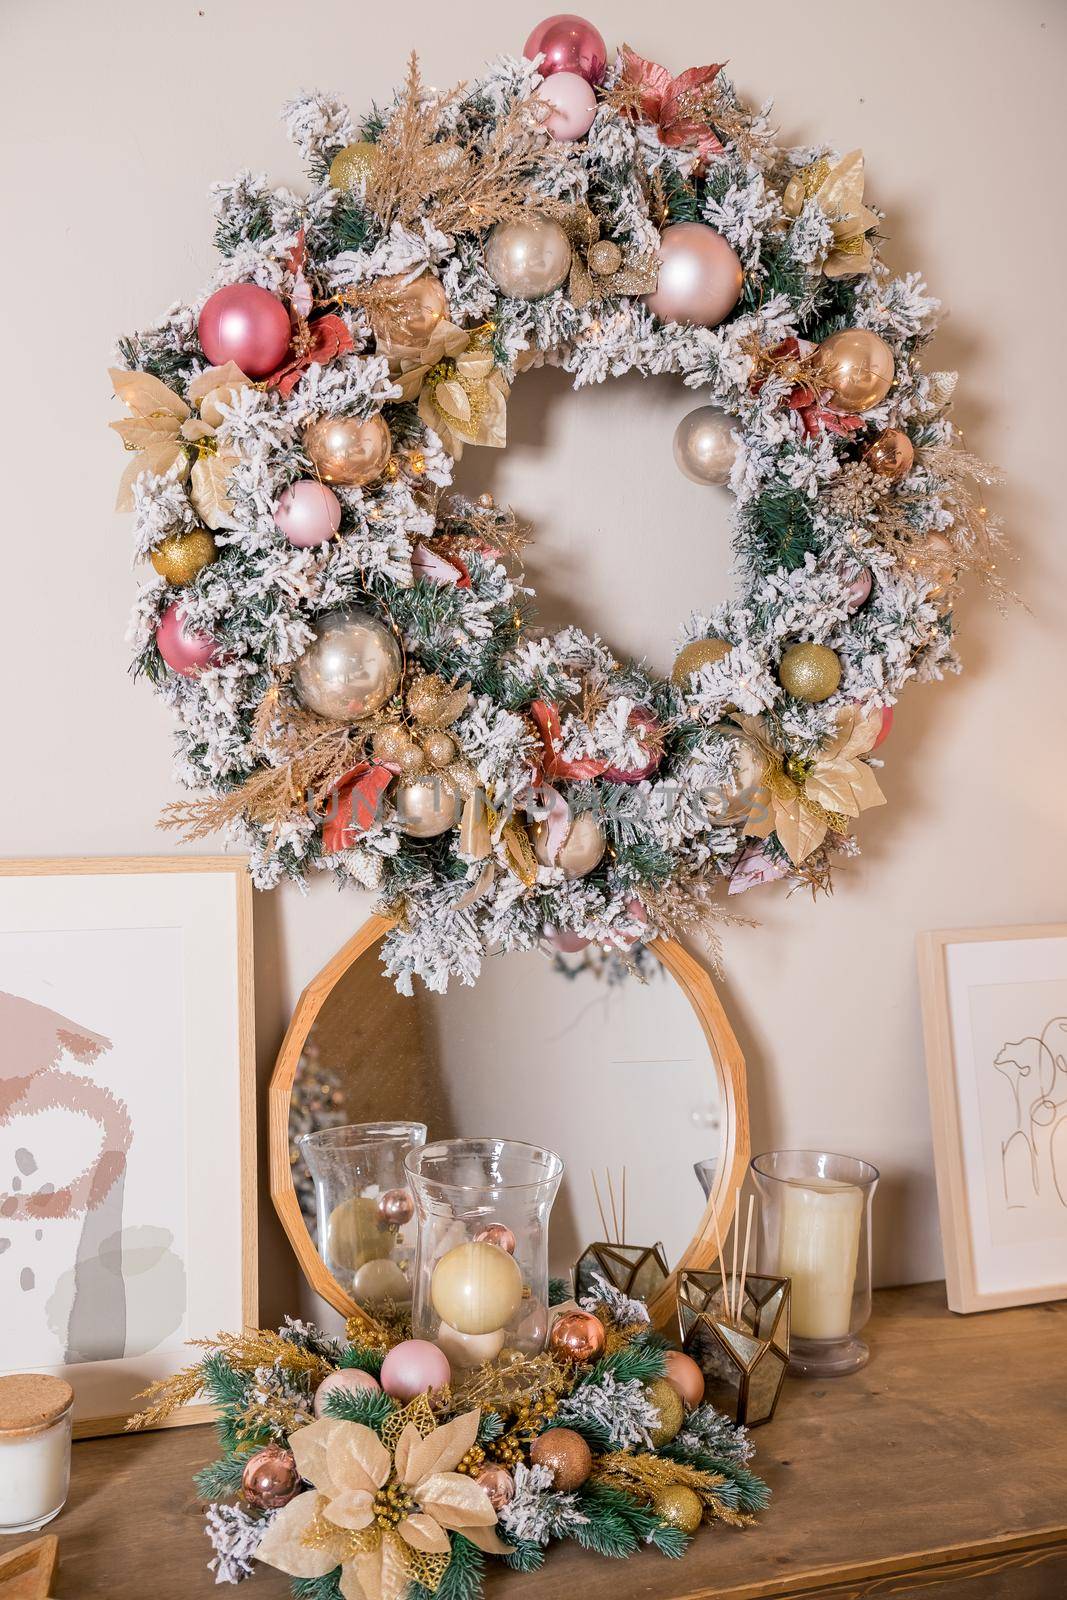 Christmas wreath made of natural fir branches hanging on a white wall. Wreath with natural ornaments: bumps, walnuts, cinnamon, cones.